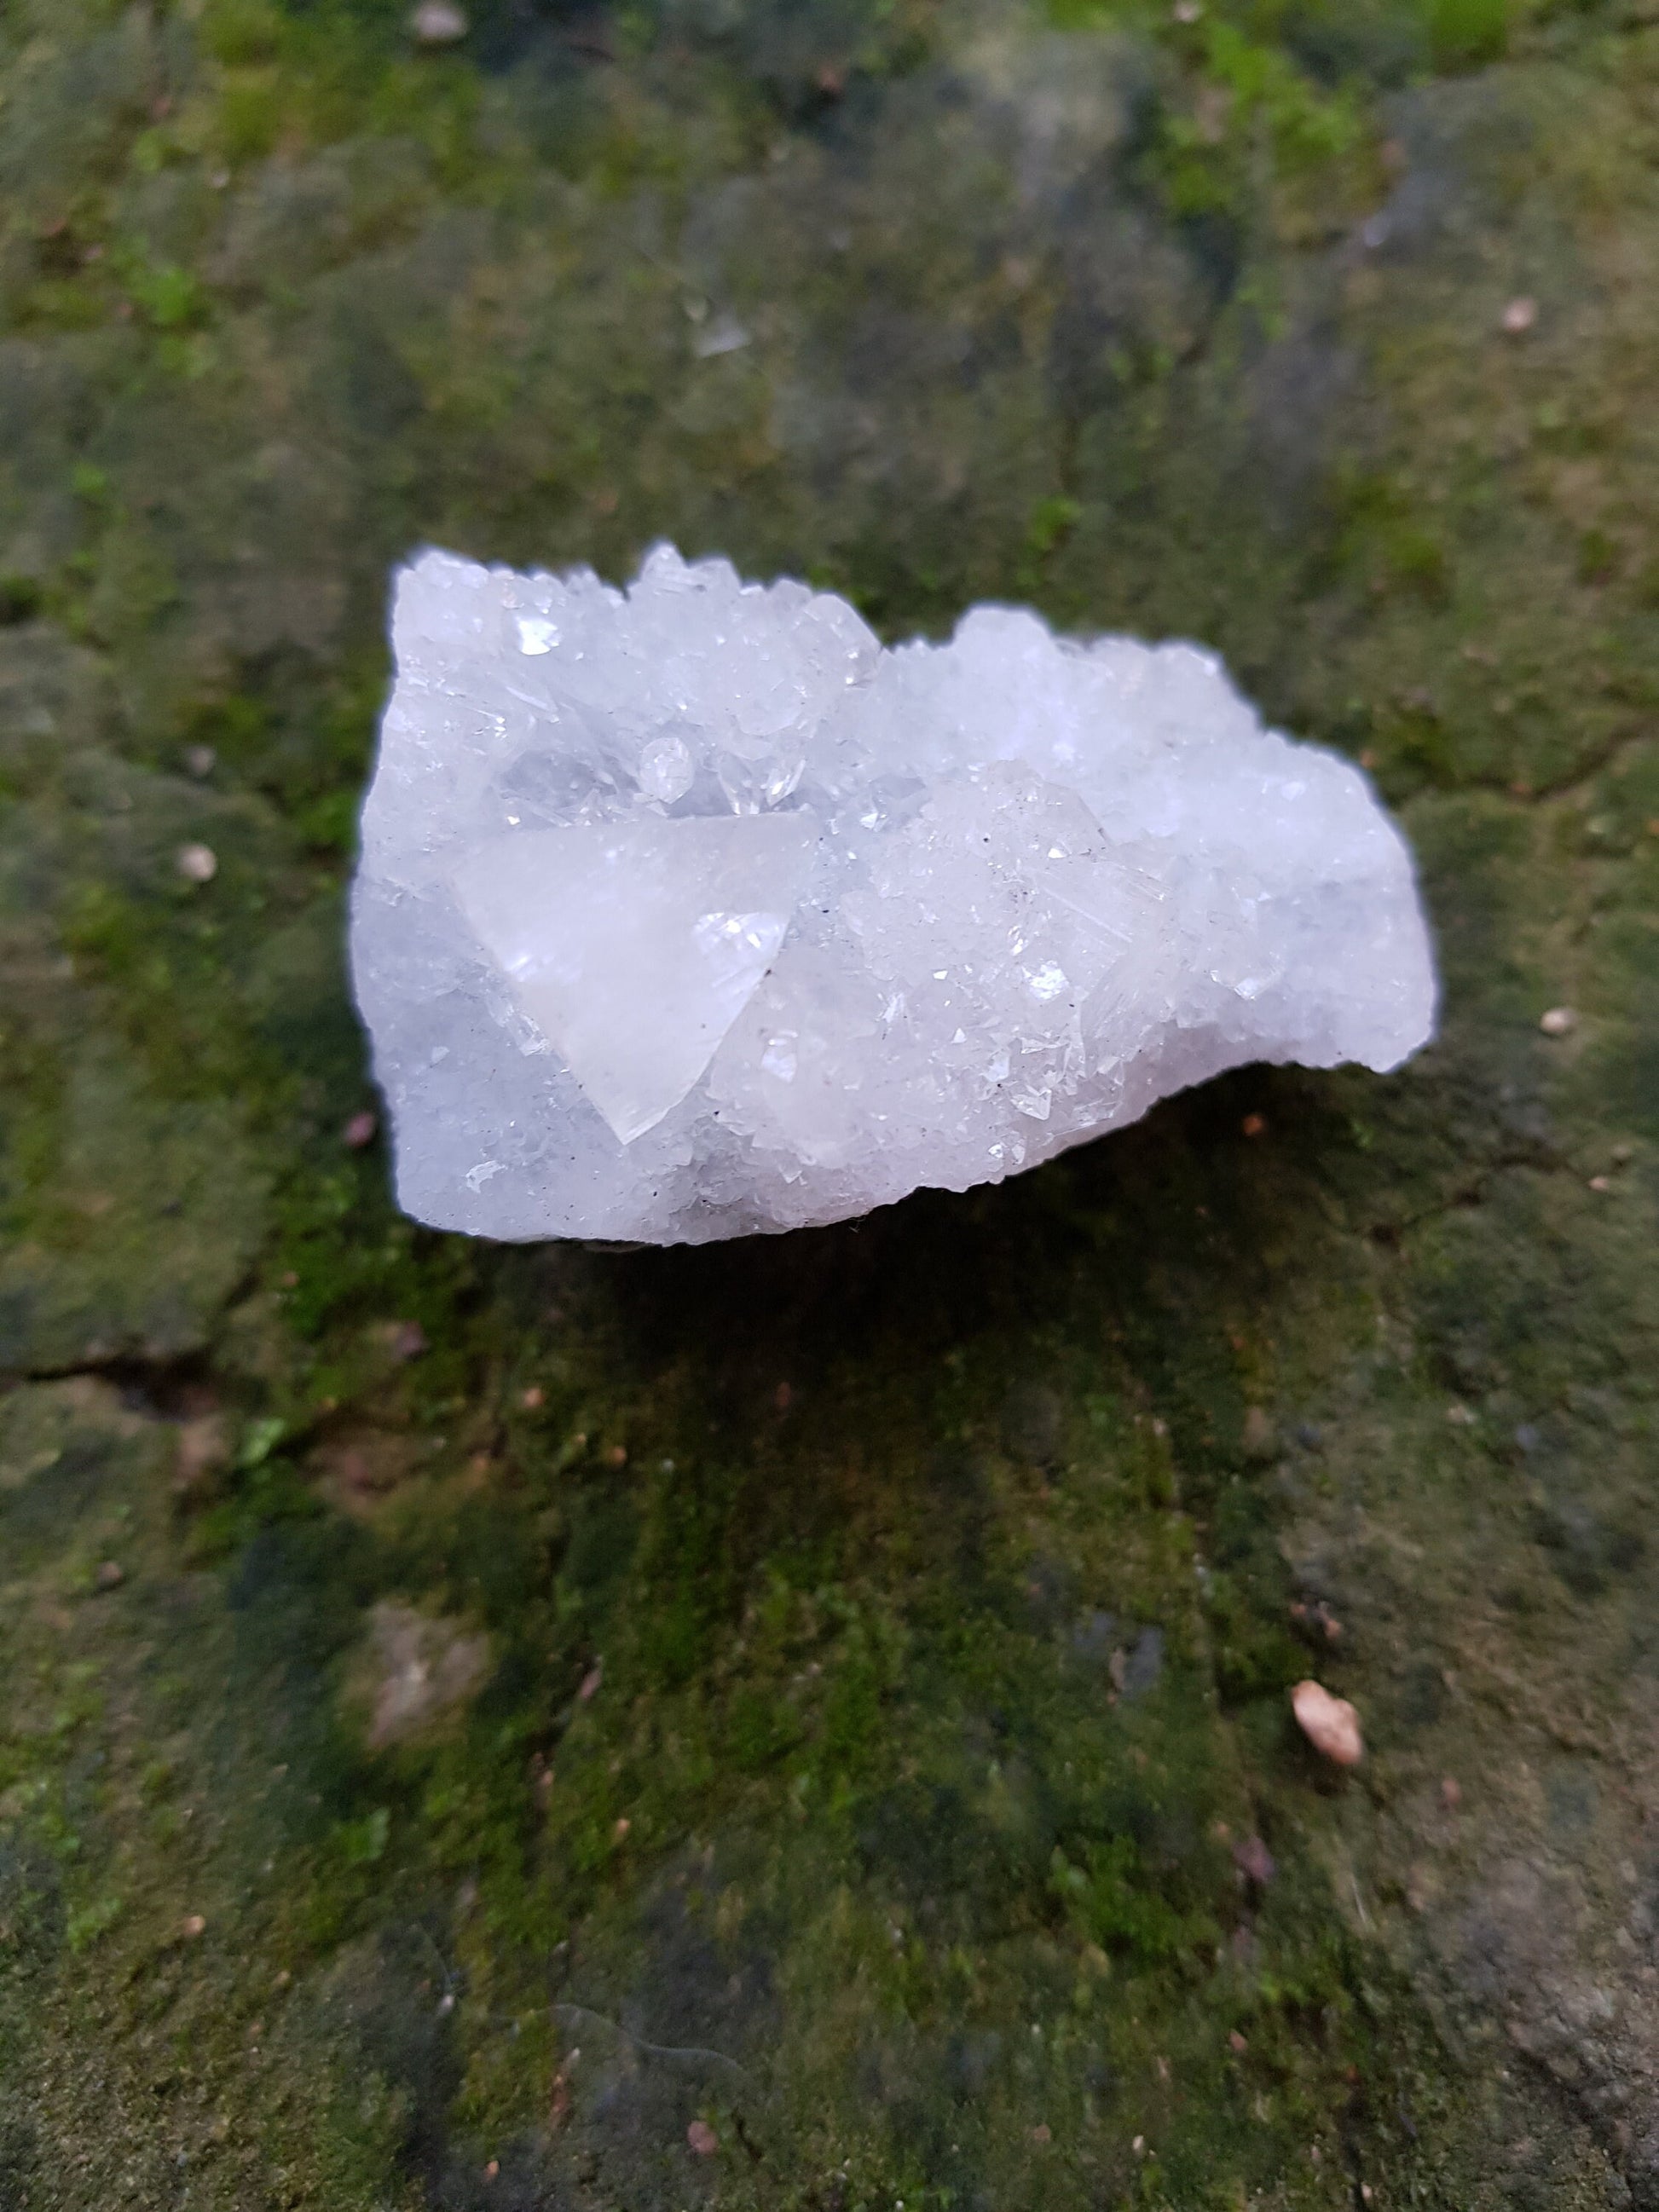 Small Natural Apophylite Crystal Cluster, Healing Crystal, Mineral Specimen, Mineral Collection